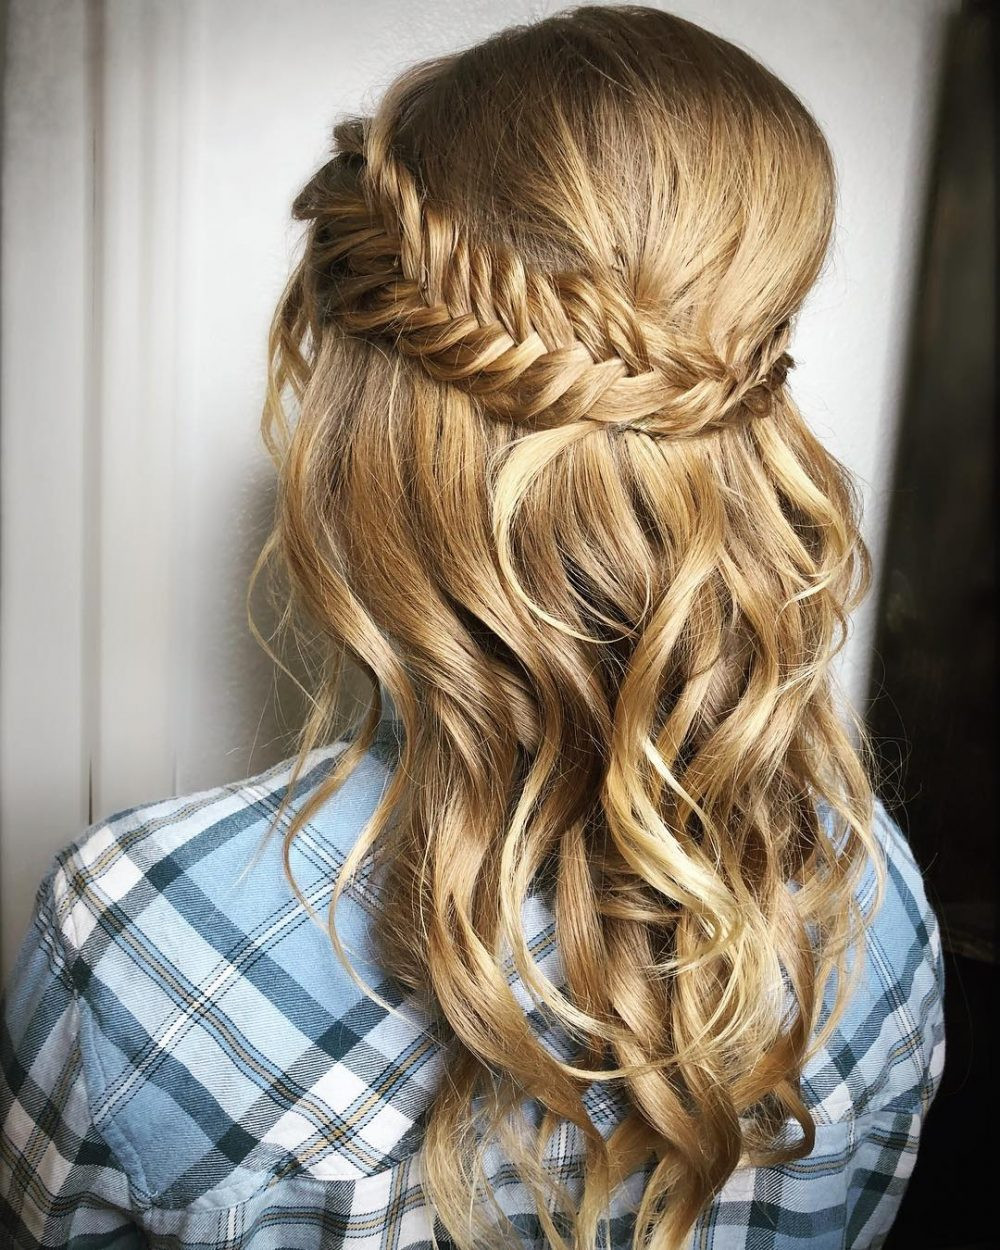 Hairstyles For Prom Half Up Half Down
 Half Up Half Down Prom Hairstyles and How To s